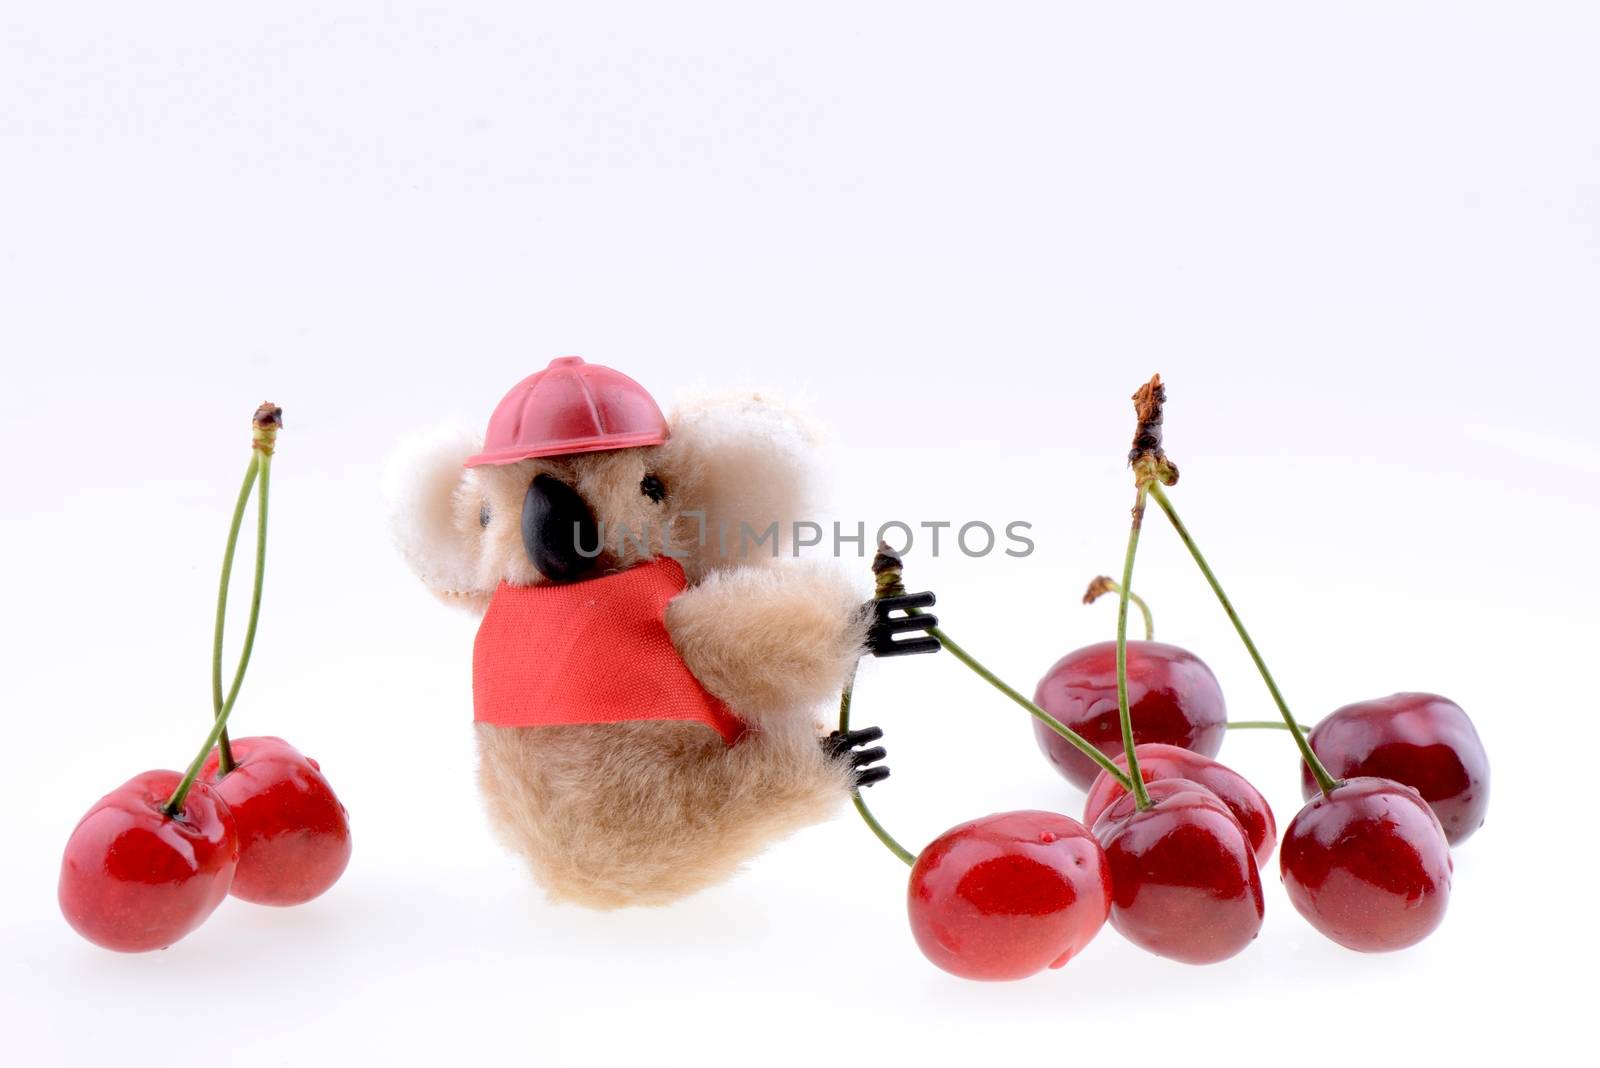 Toy koala collecting Sweet cherries isolated on a white background